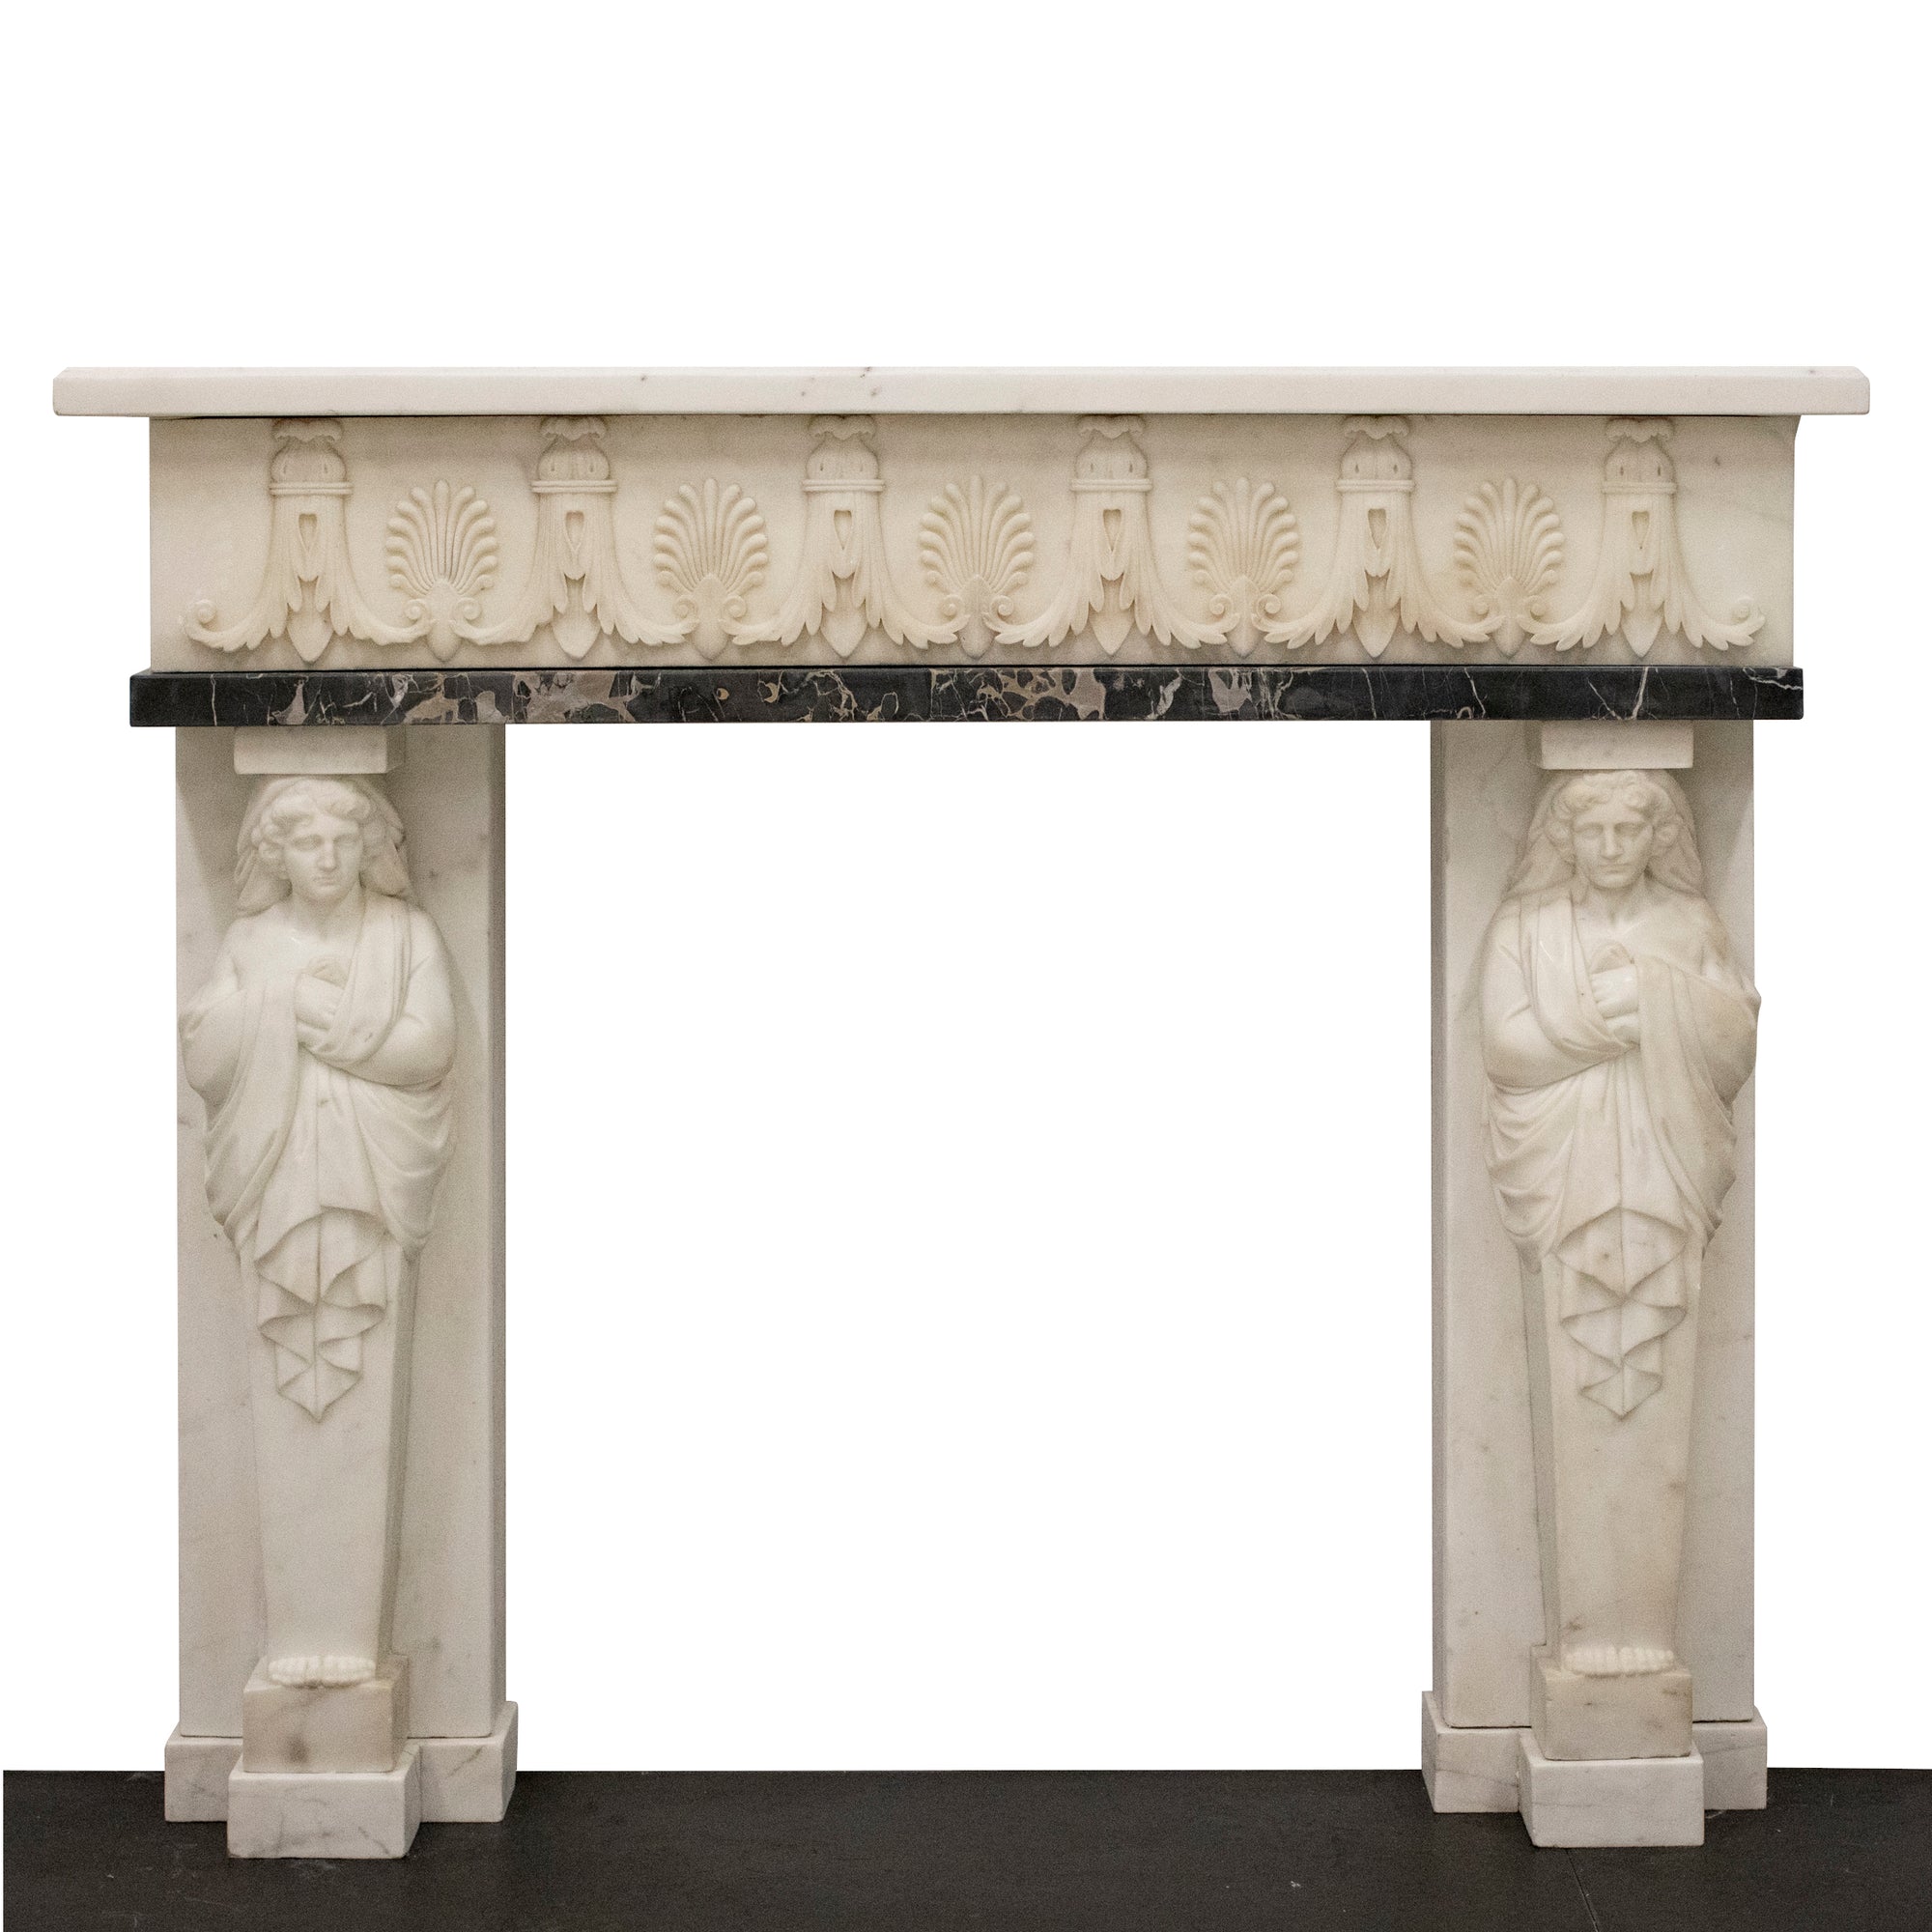 Antique Greek Revival Statuary Marble Fireplace | The Architectural Forum